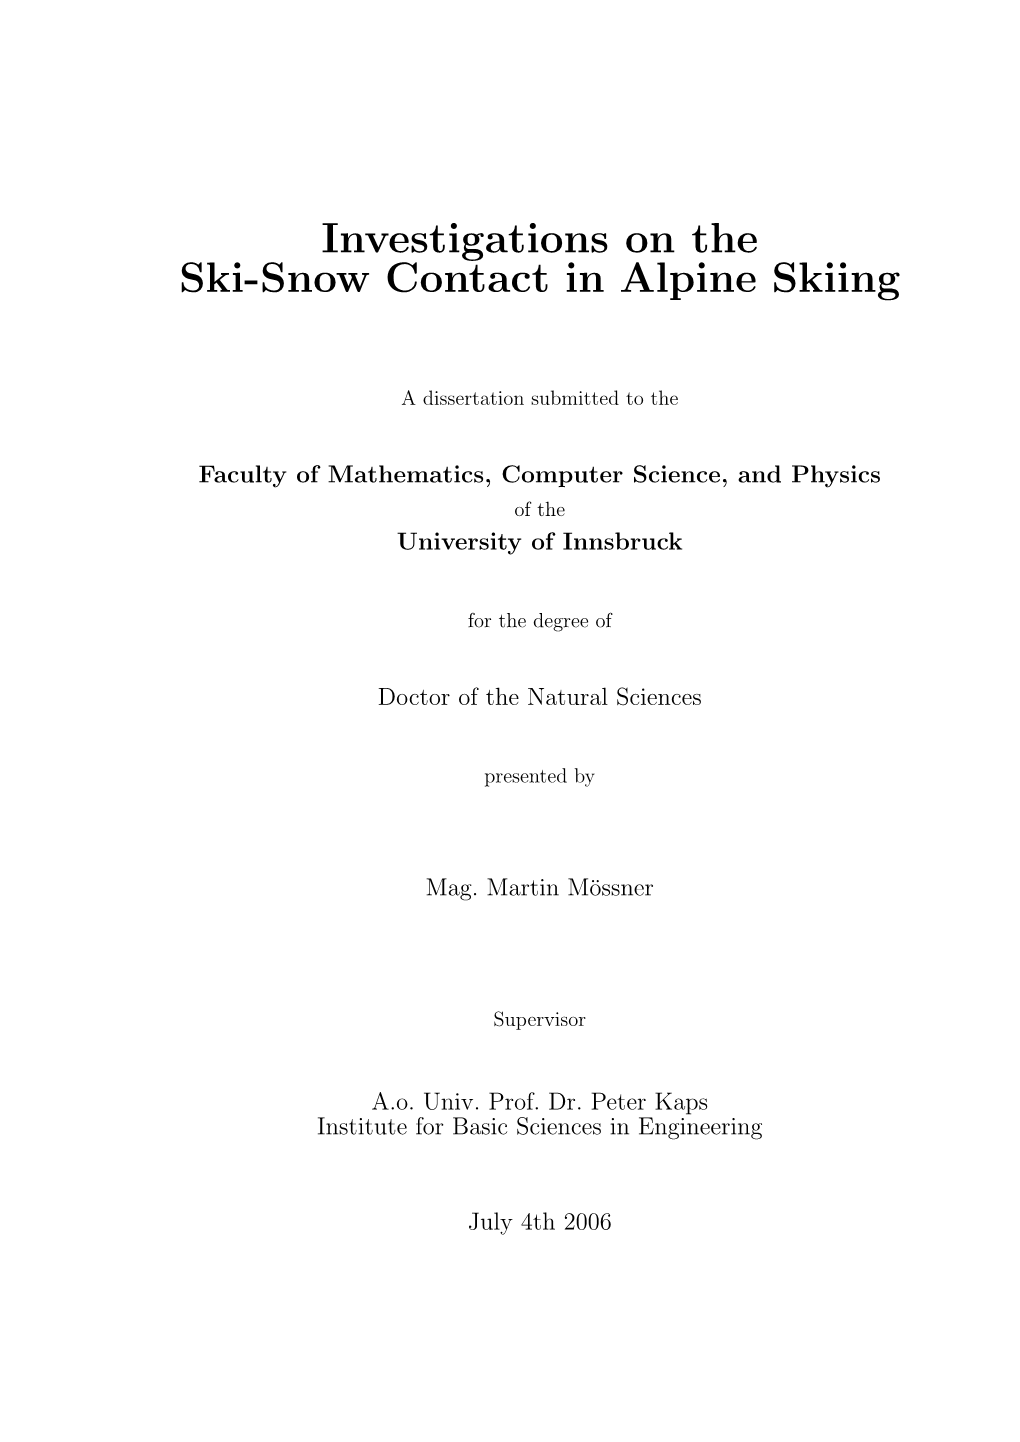 Investigations on the Ski-Snow Contact in Alpine Skiing